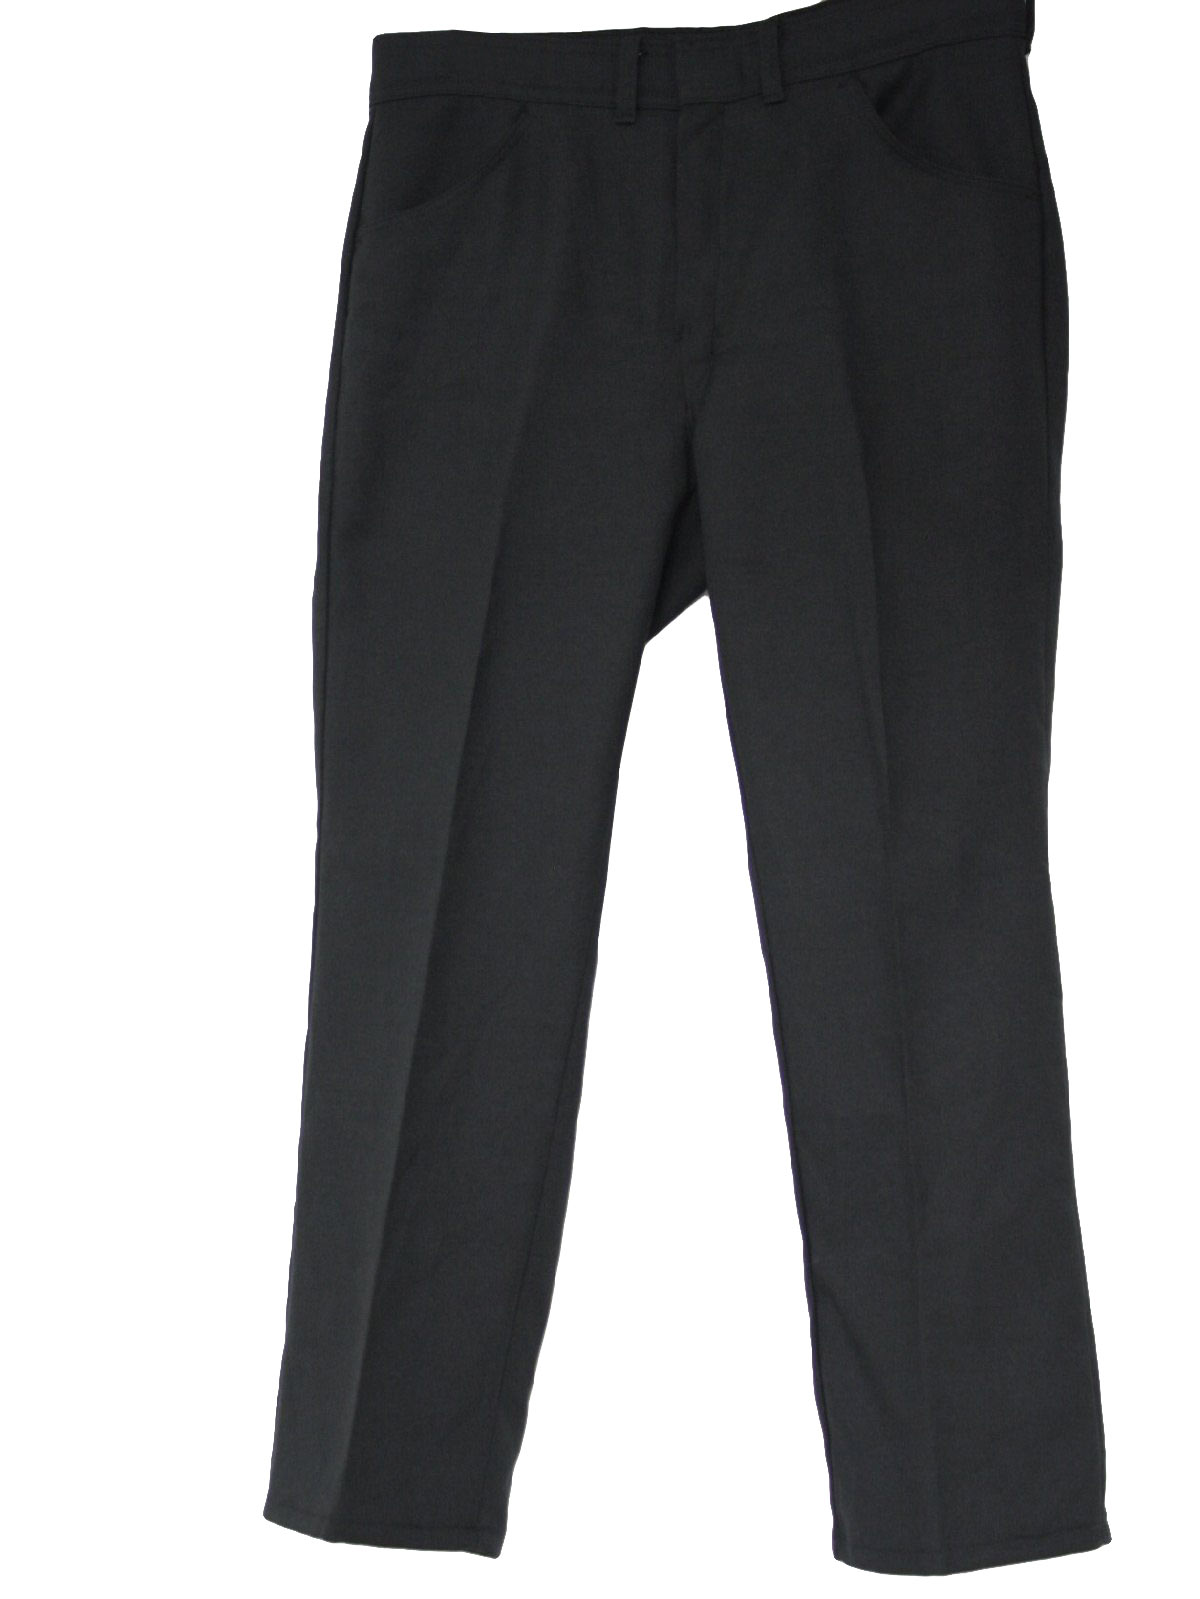 Retro 70s Pants (Sportabouts) : 70s -Sportabouts- Mens black polyester ...